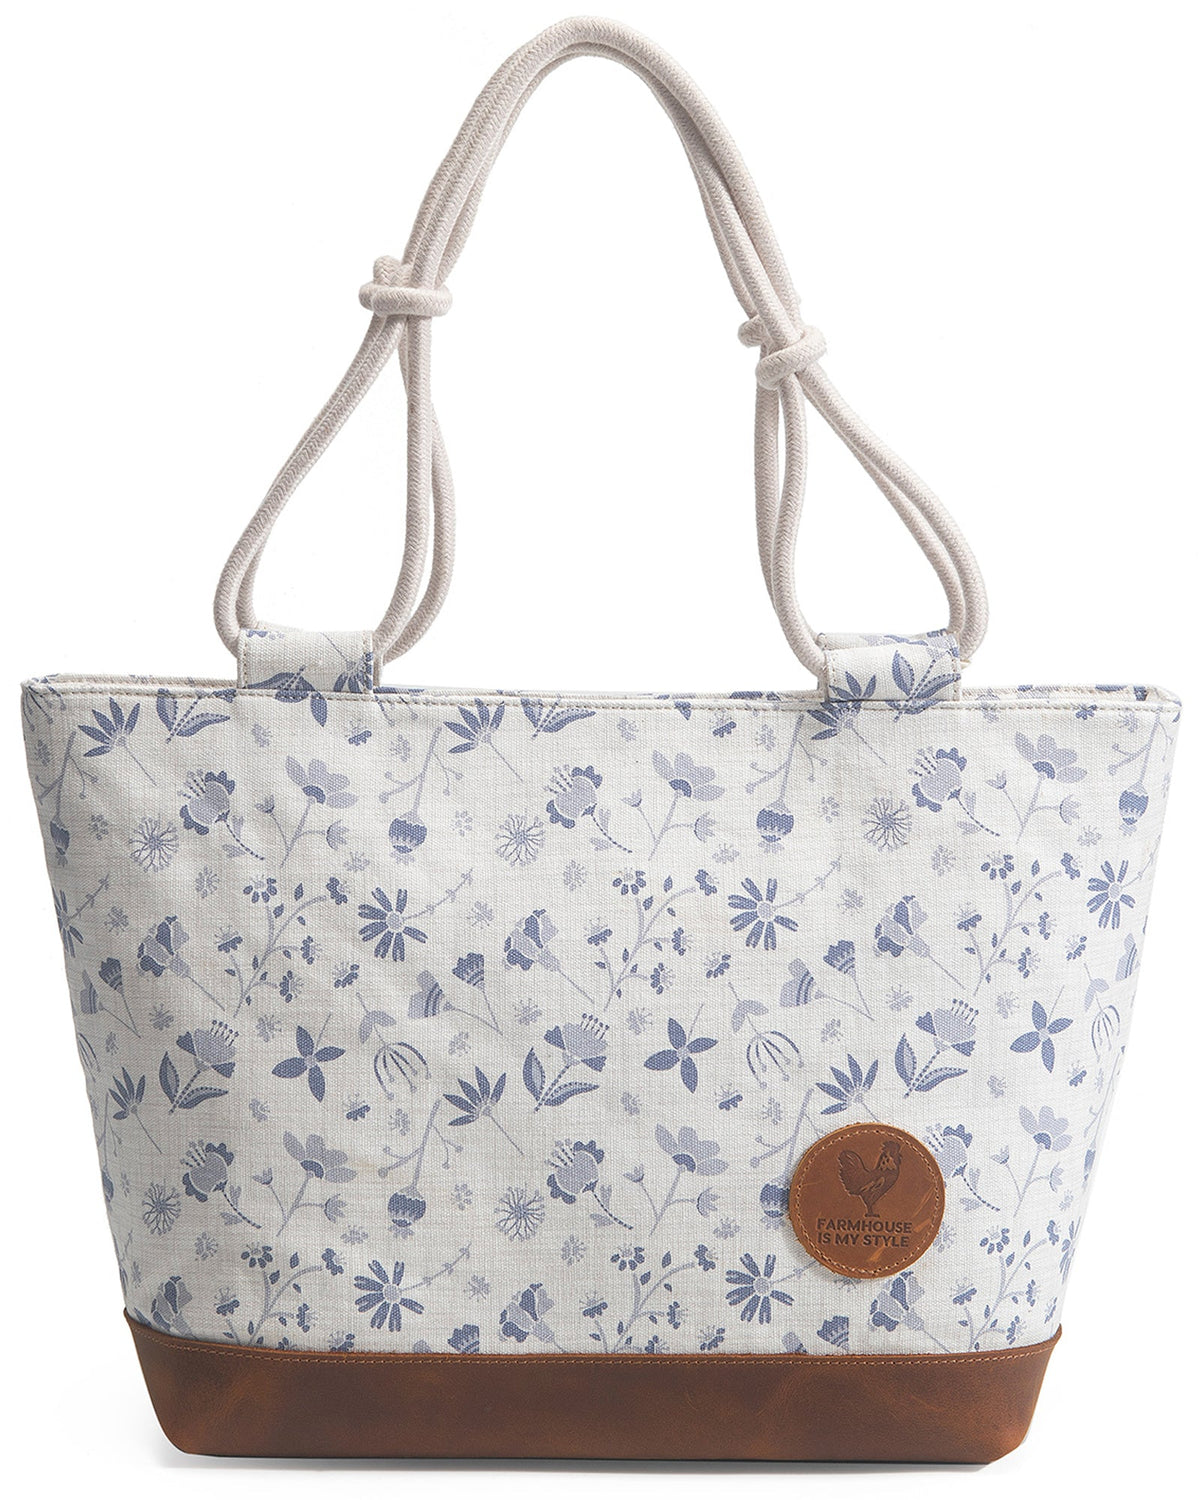 Pressed Flowers Farmhouse Hand Bag, Shoulder Bag, Tote, Purse - Farmhouse  Is My Style